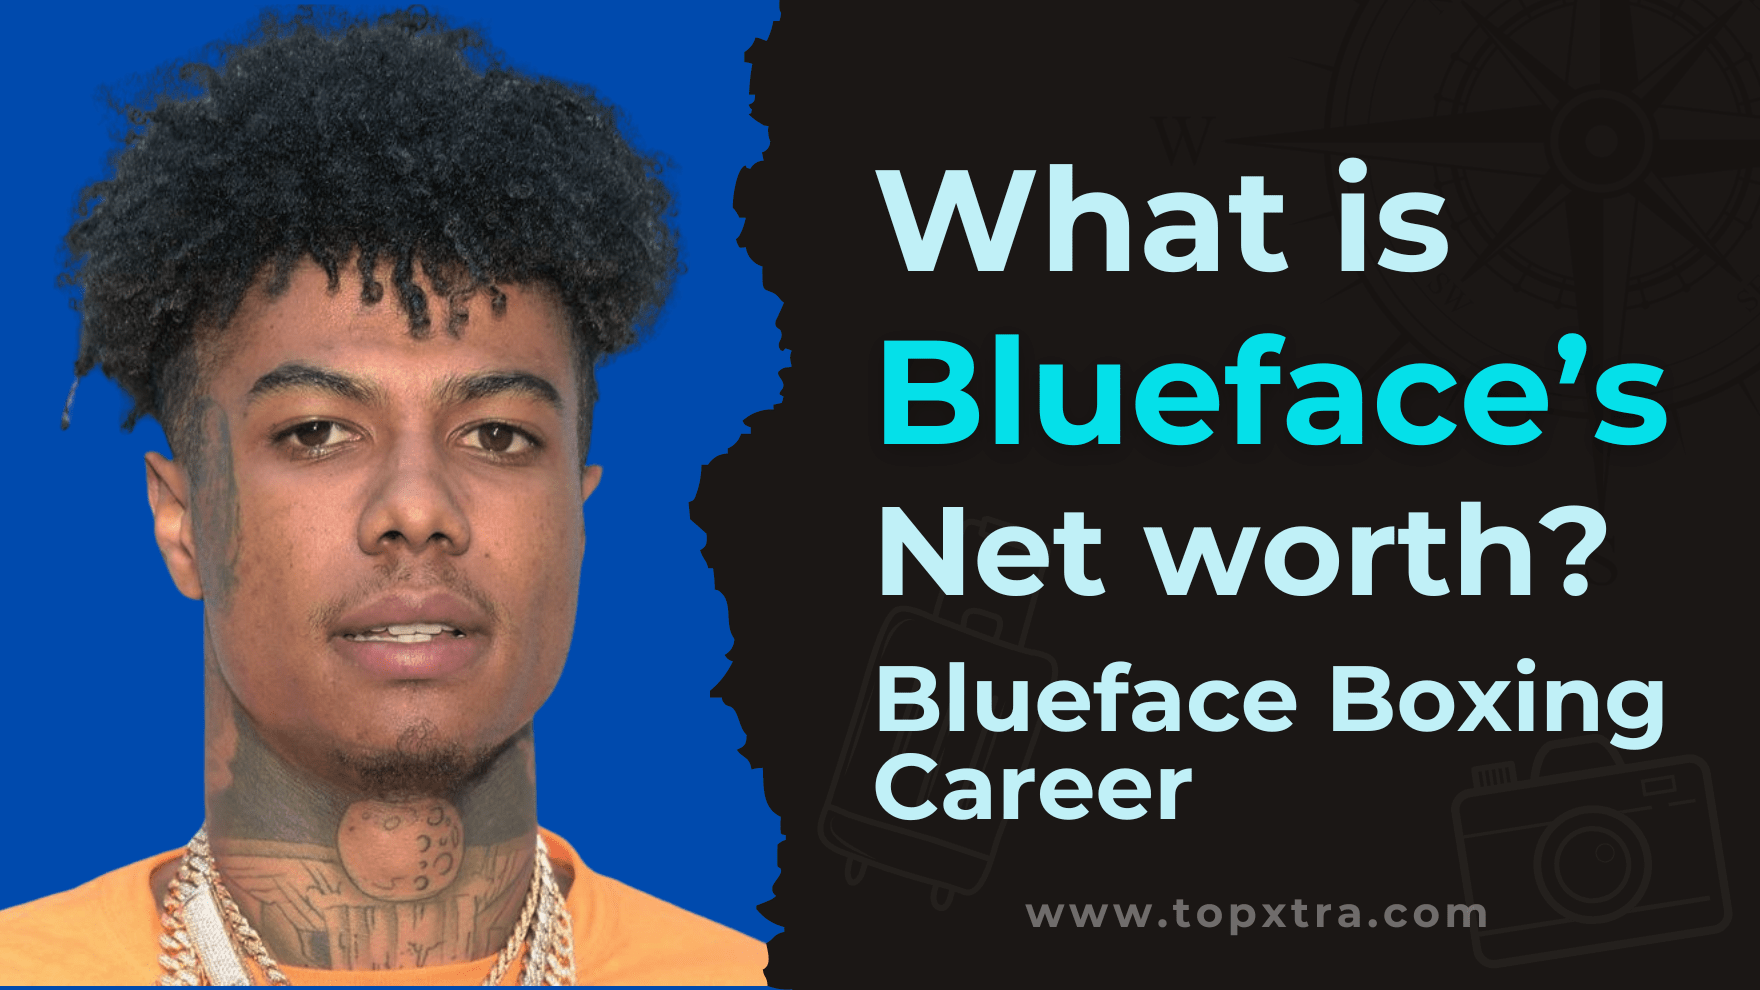 Blueface Net Worth | Early Life, Career, and Songs of Blueface